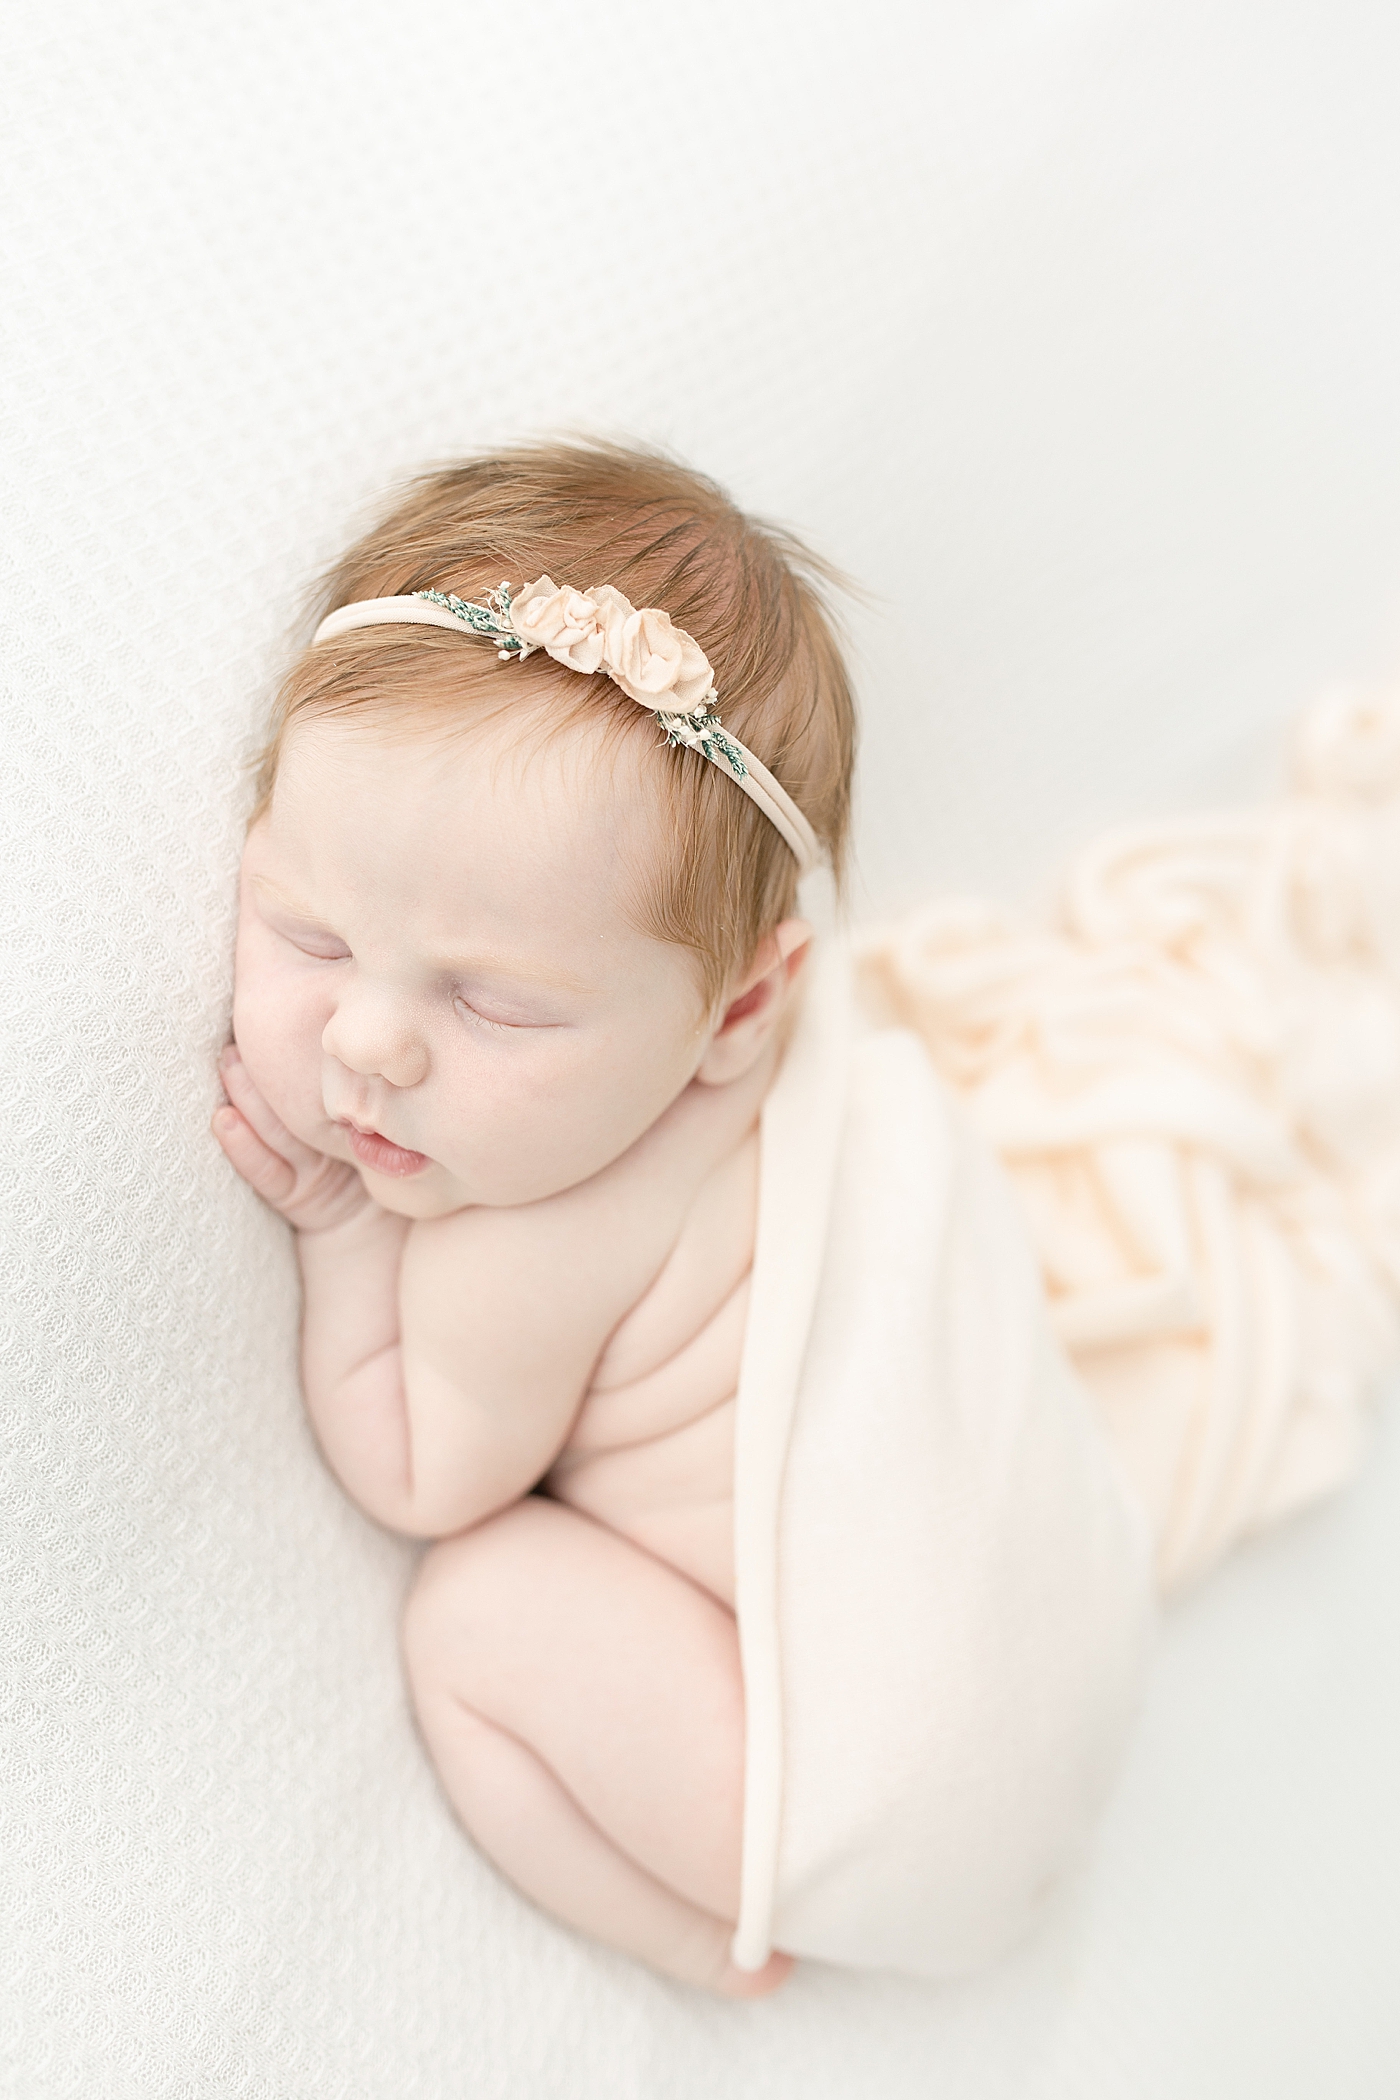 Sleeping baby girl in pink swaddle and headband | Photo by Little Sunshine Photography